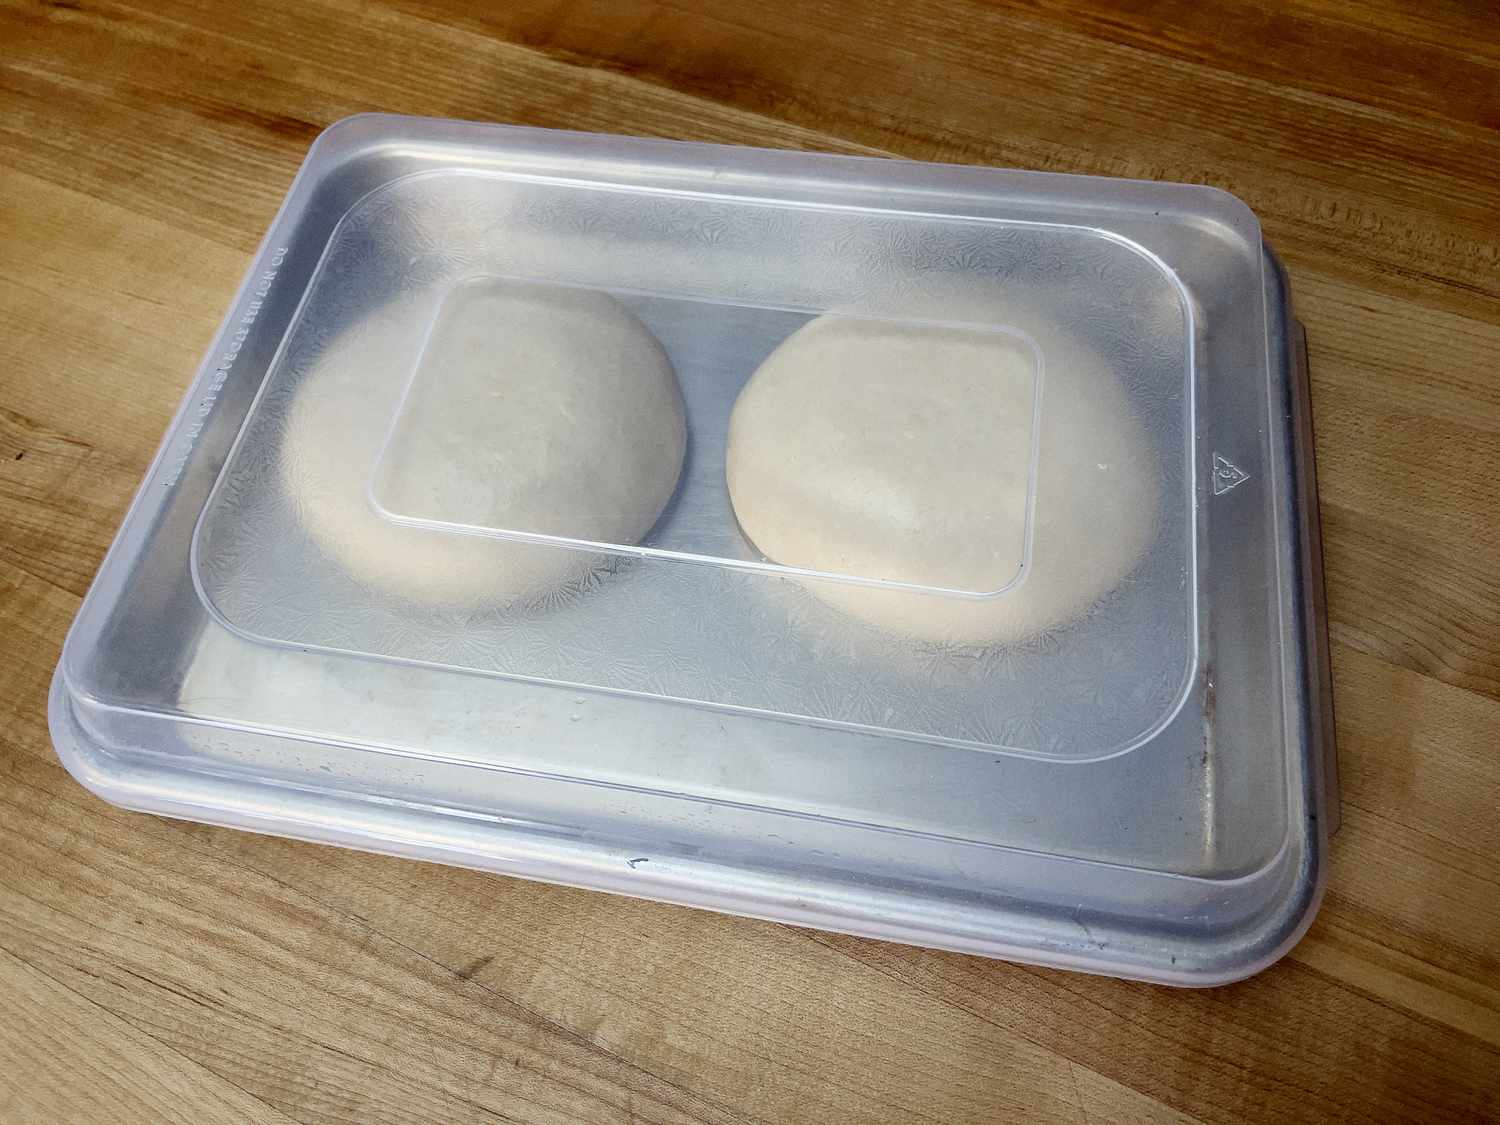 Two balls of dough proofing in a sheet pan with a lid on it